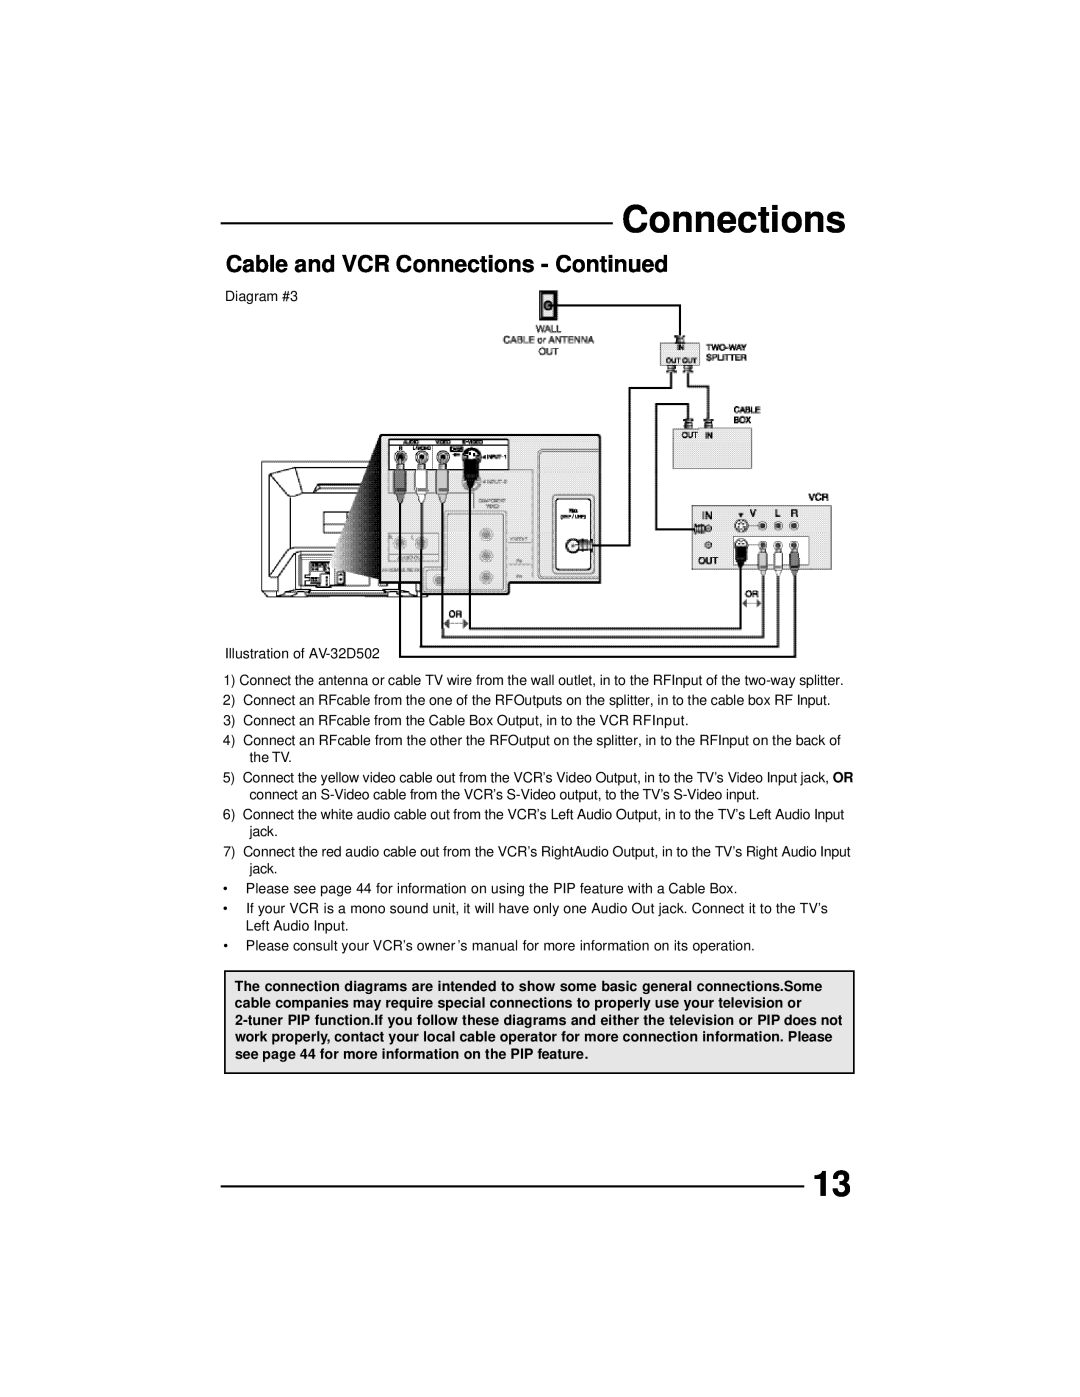 JVC AV 32D202, AV 36D202, AV 36D502, AV 36D302, AV 32D302, AV 32D502, AV 27D502 manual Cable and VCR Connections - Continued 